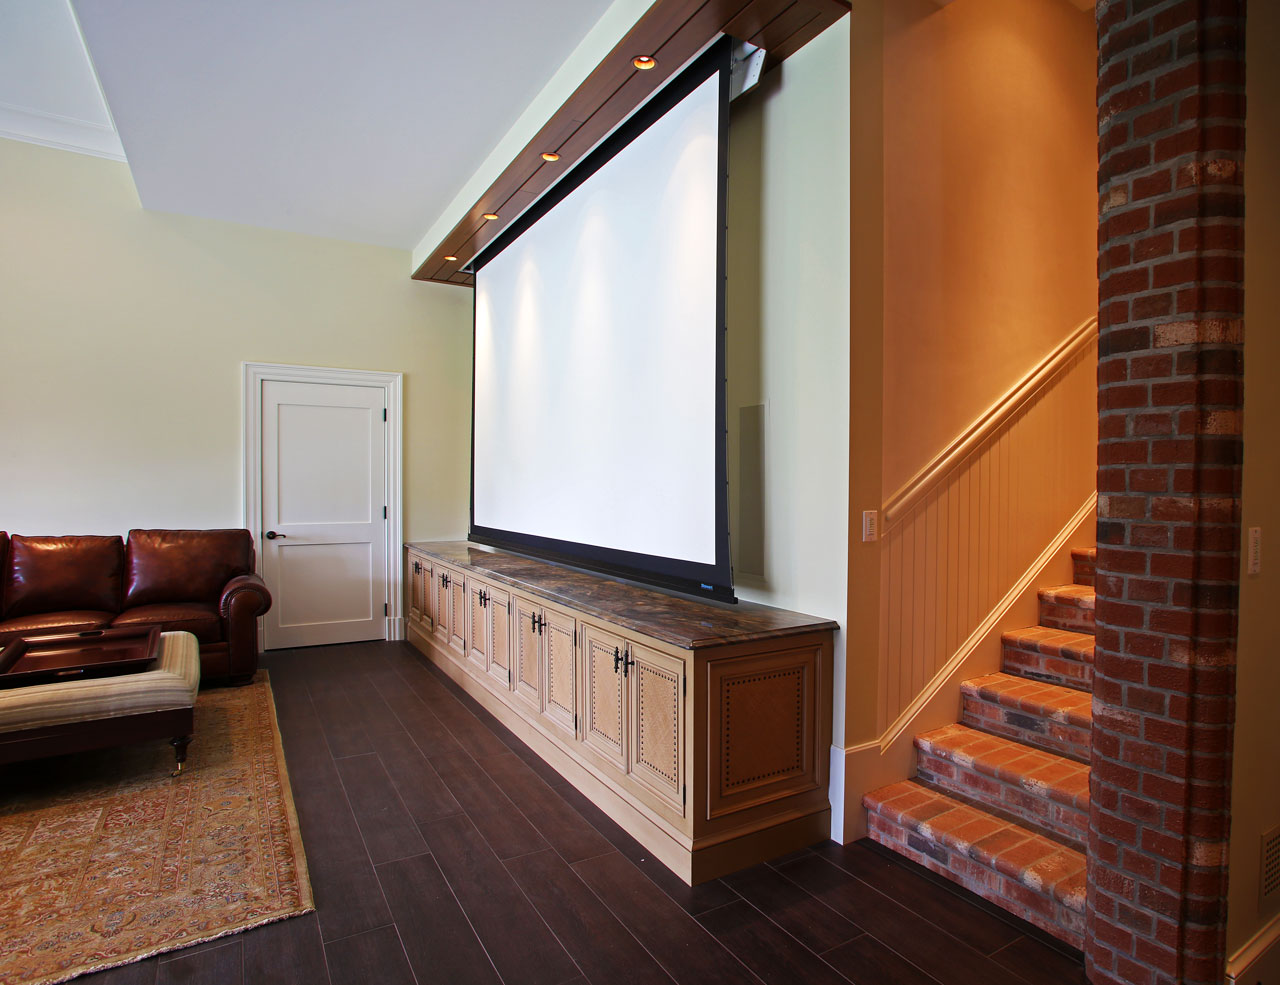 THEATER ROOMS